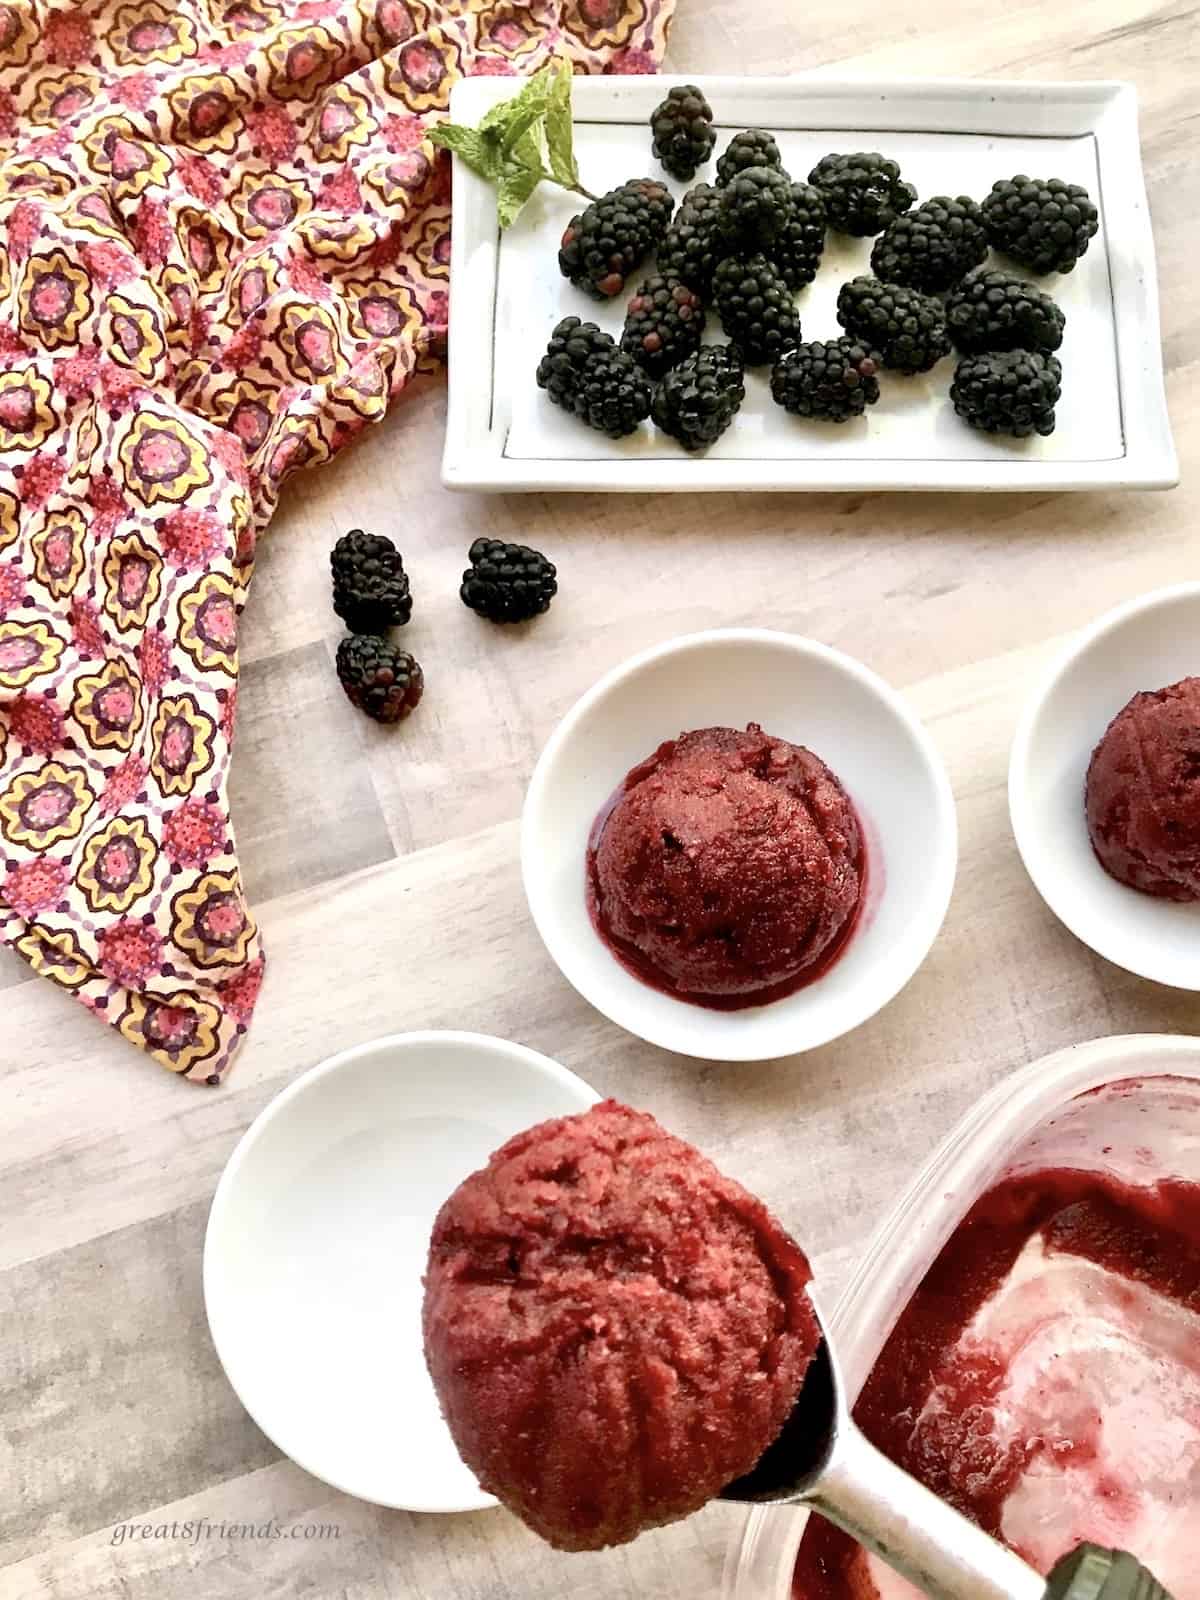 Italian ice scoops in white bowls one scoop in the ice cream scoop with blackberries on the side.